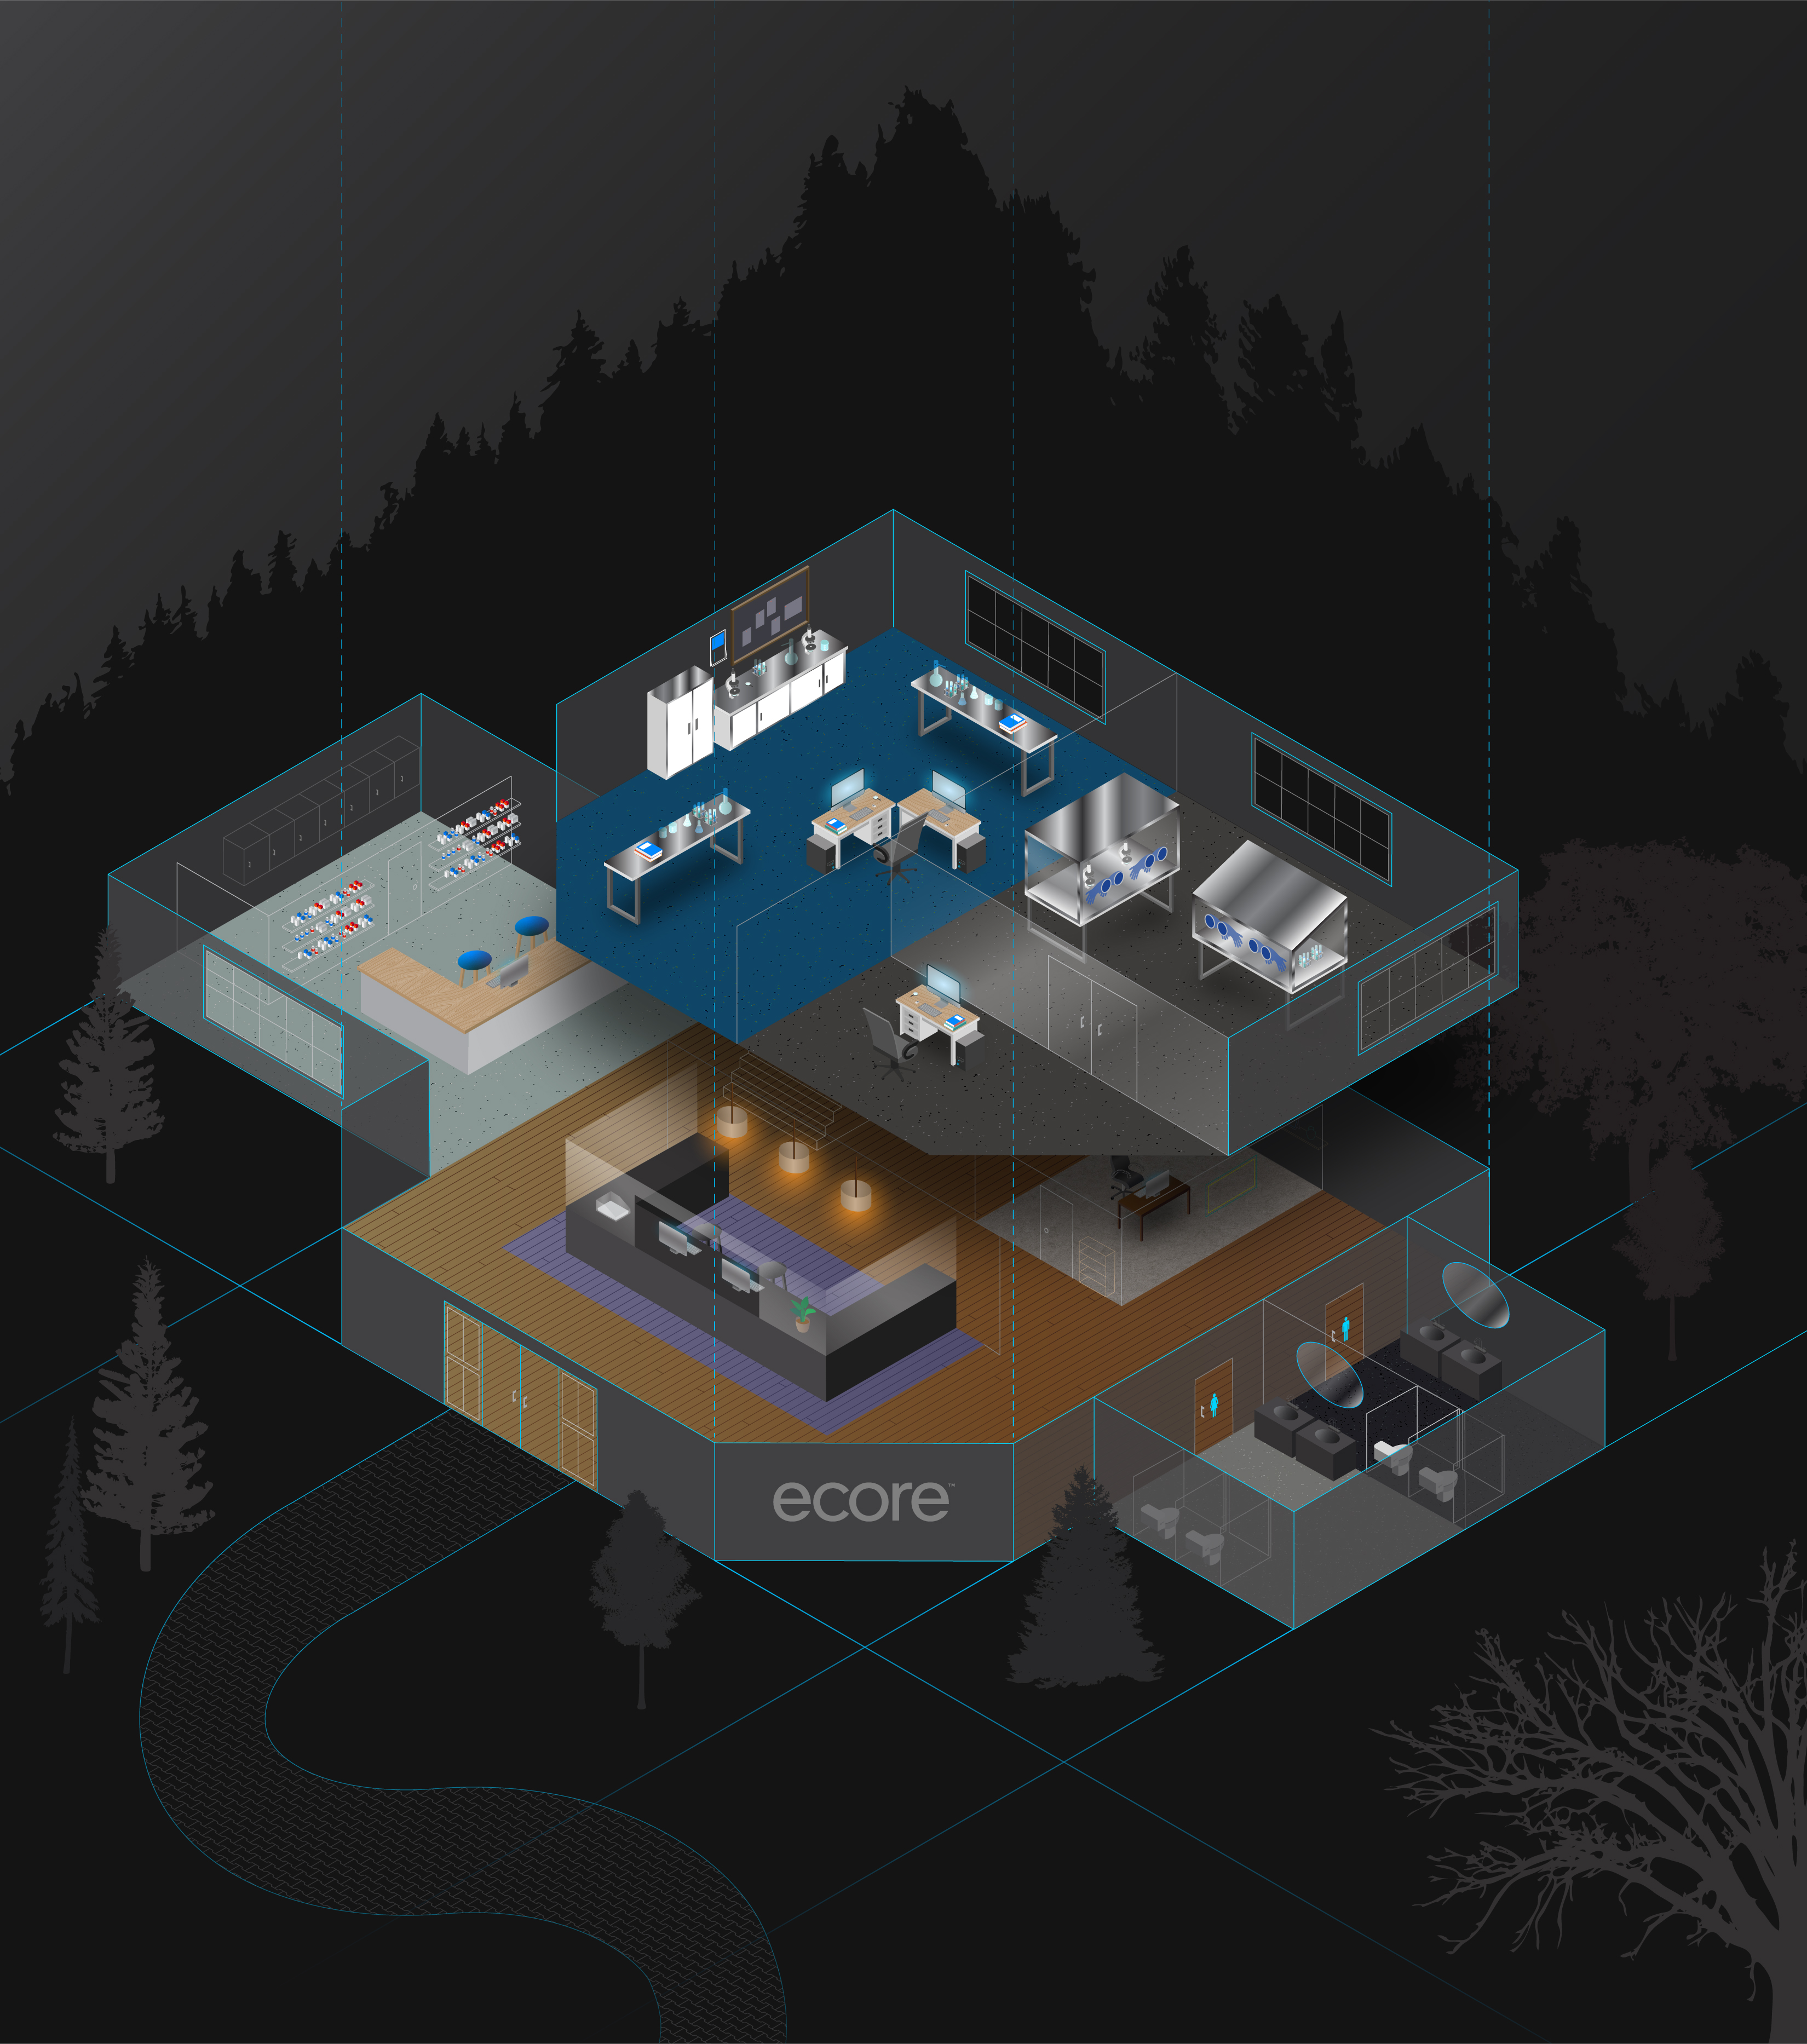 Blueprint of a lab and life science facility featuring Ecore flooring options in each room or space